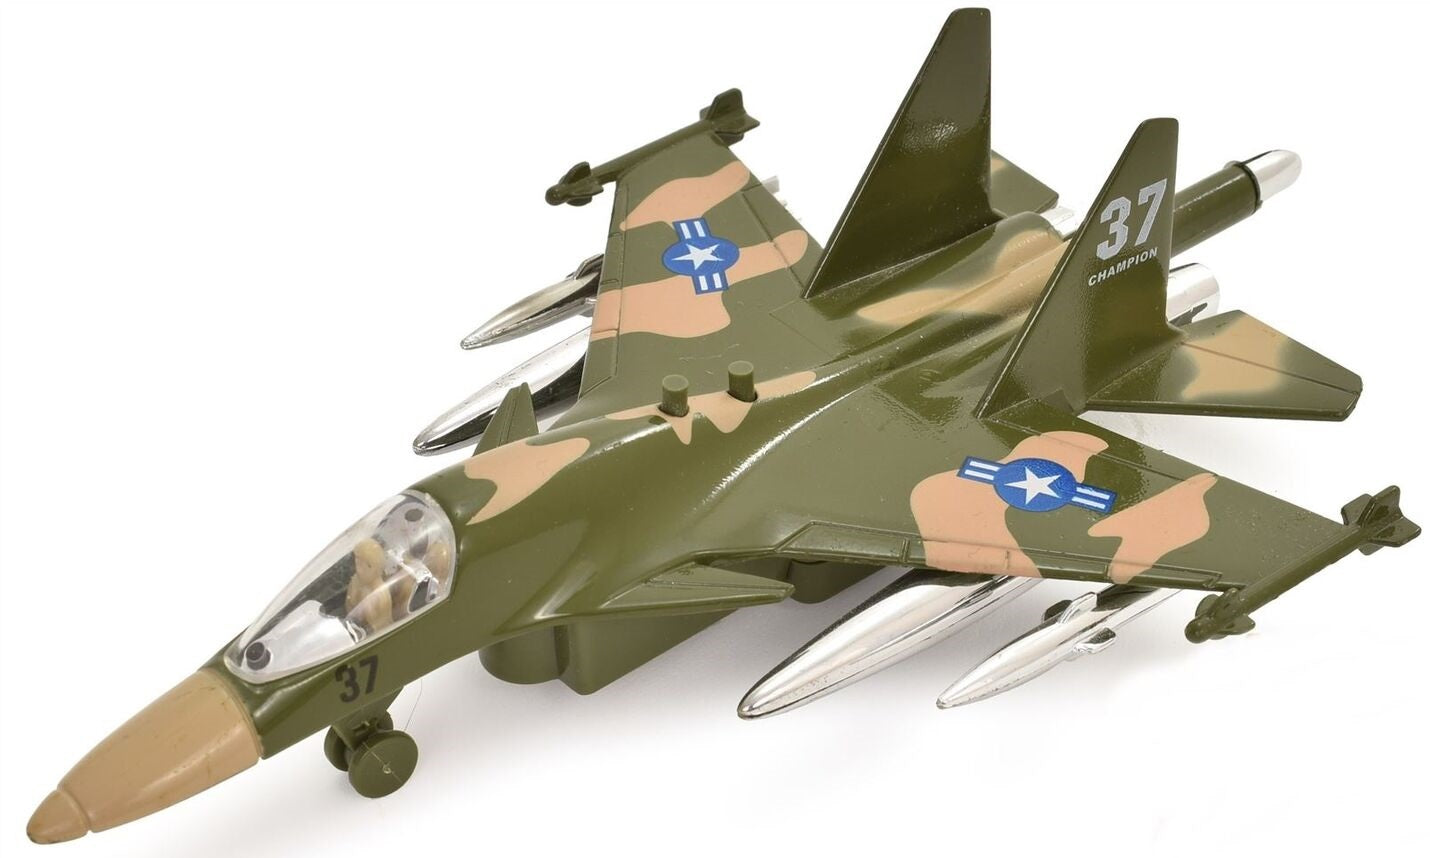 Kandytoys Fighter Plane 1/110 Scale Toy